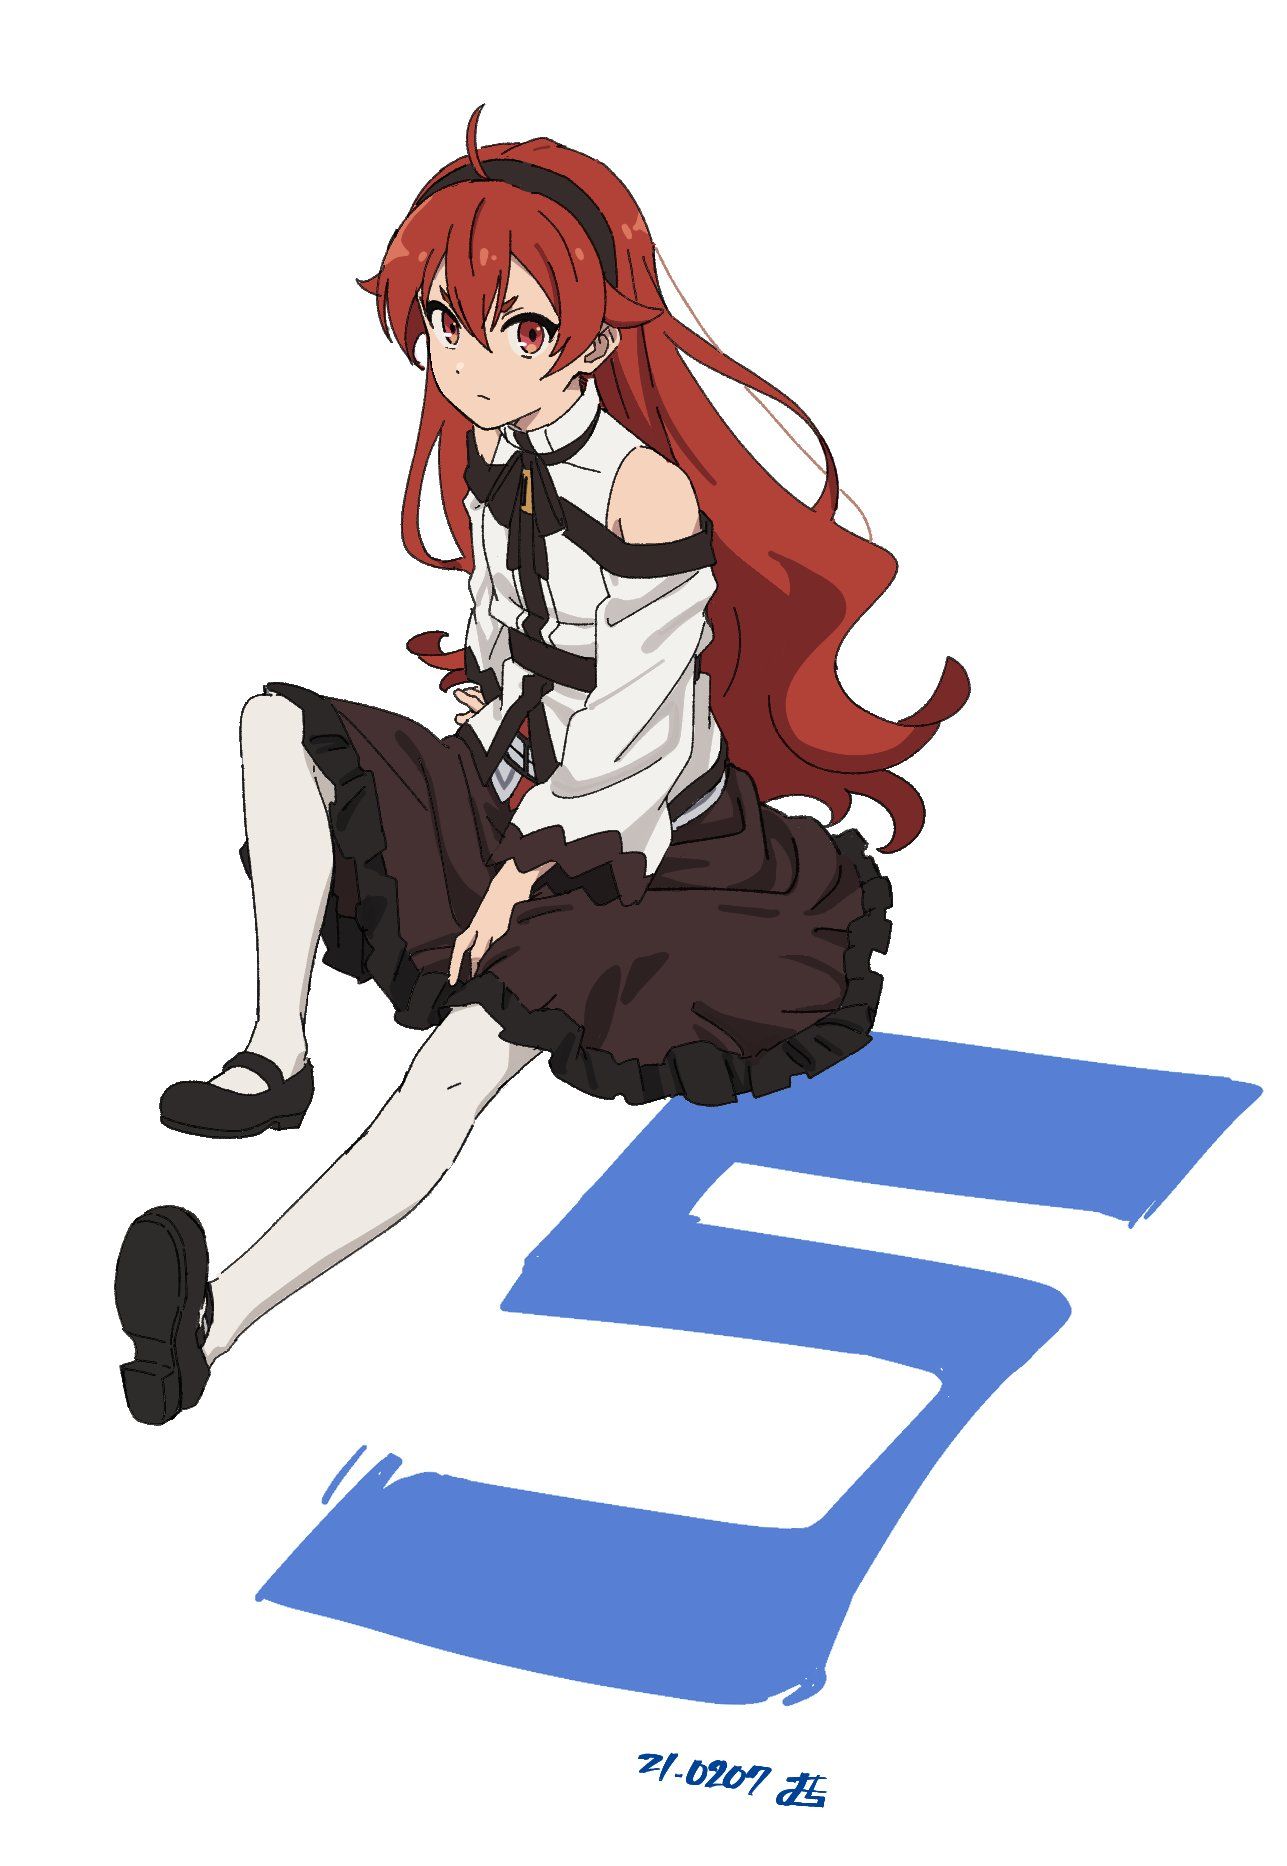 Mushoku Tensei celebrates its fifth episode with illustrations -Your alternative anime store